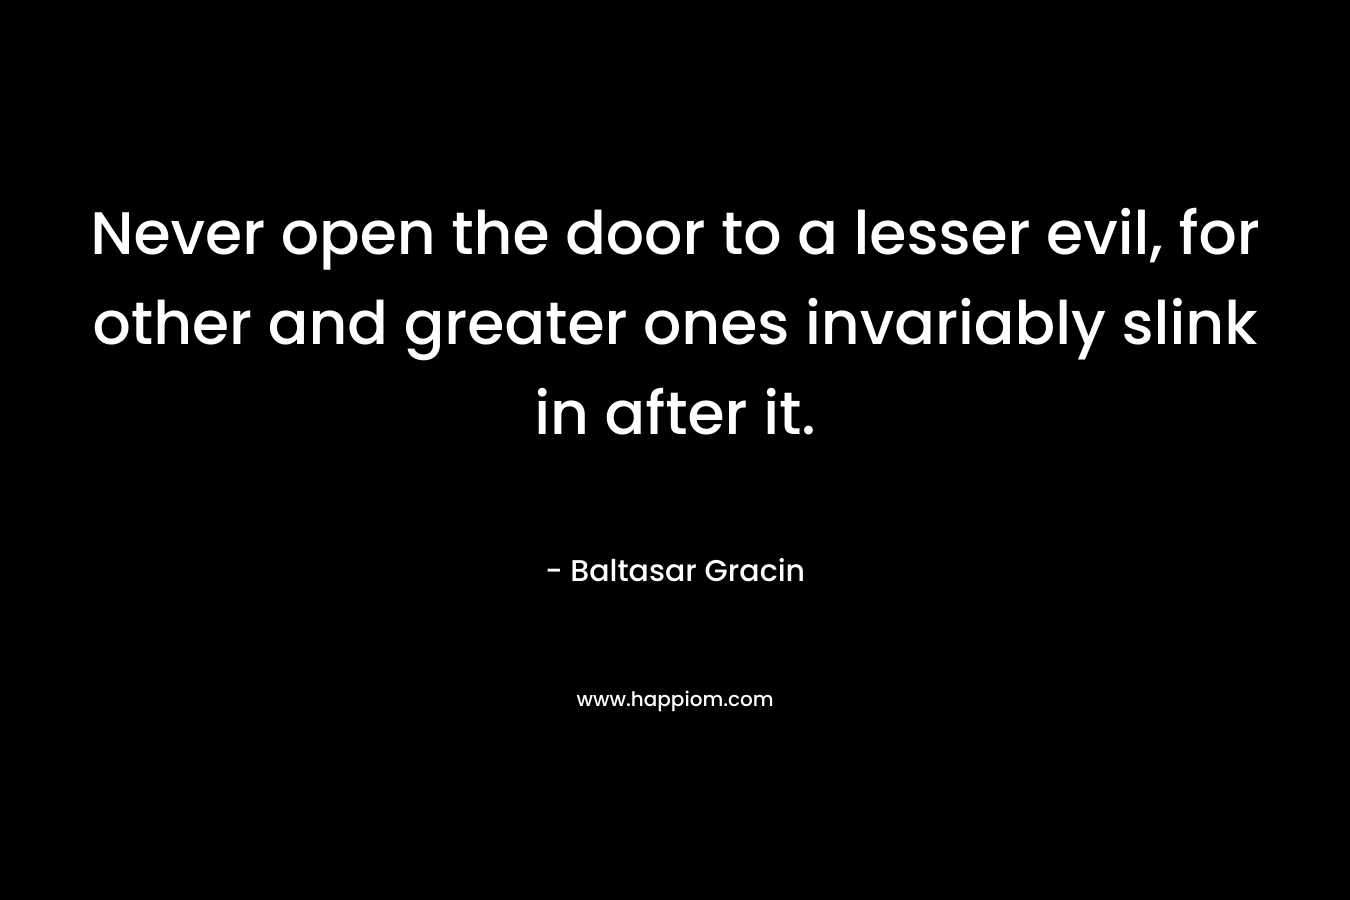 Never open the door to a lesser evil, for other and greater ones invariably slink in after it. – Baltasar Gracin